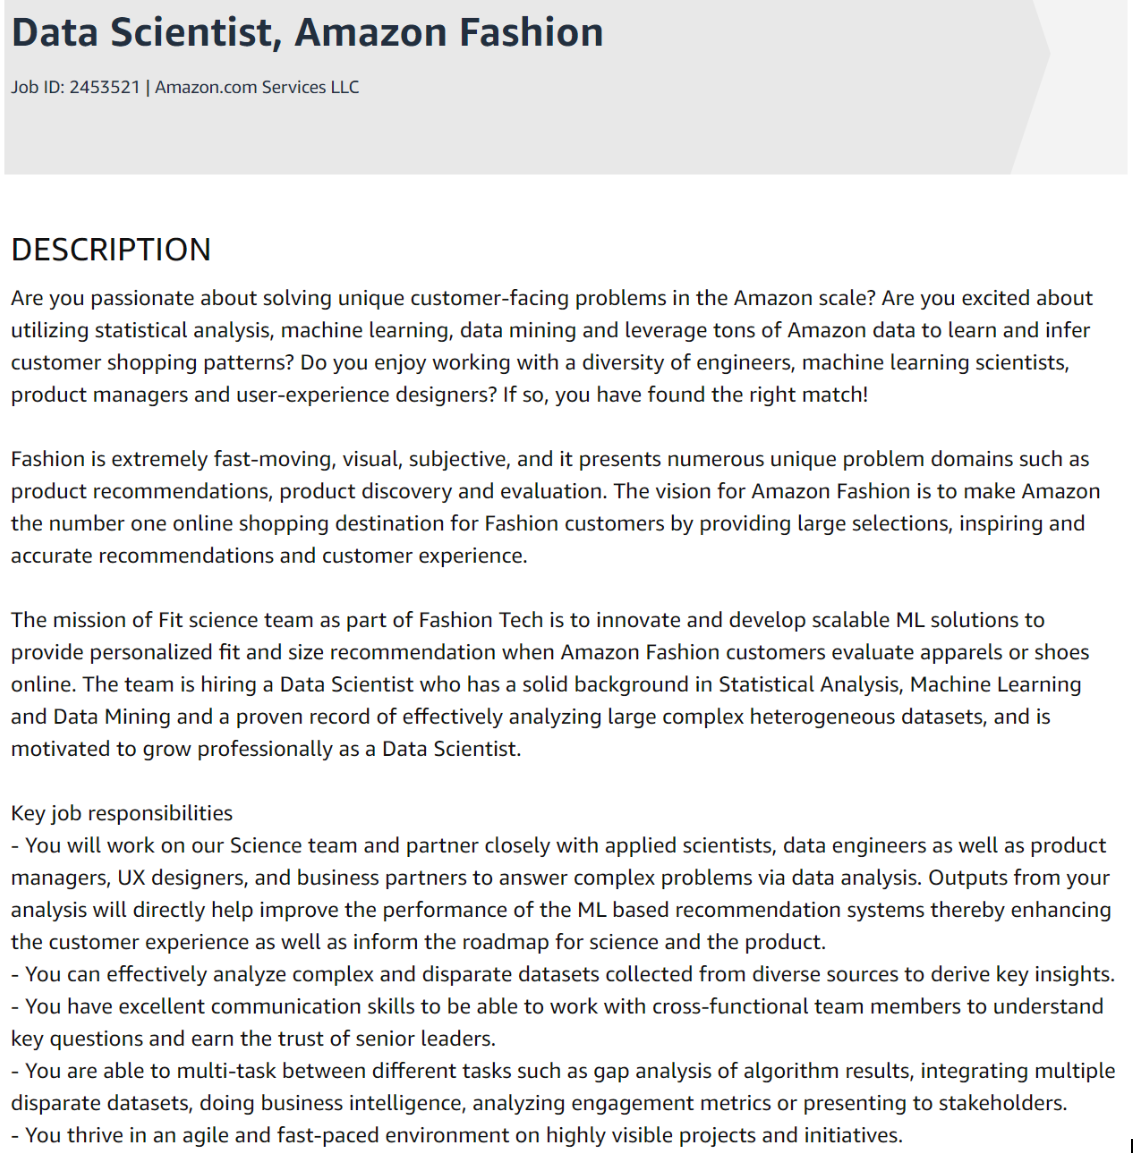 Data Scientist Salary and Responsibilities at Amazon